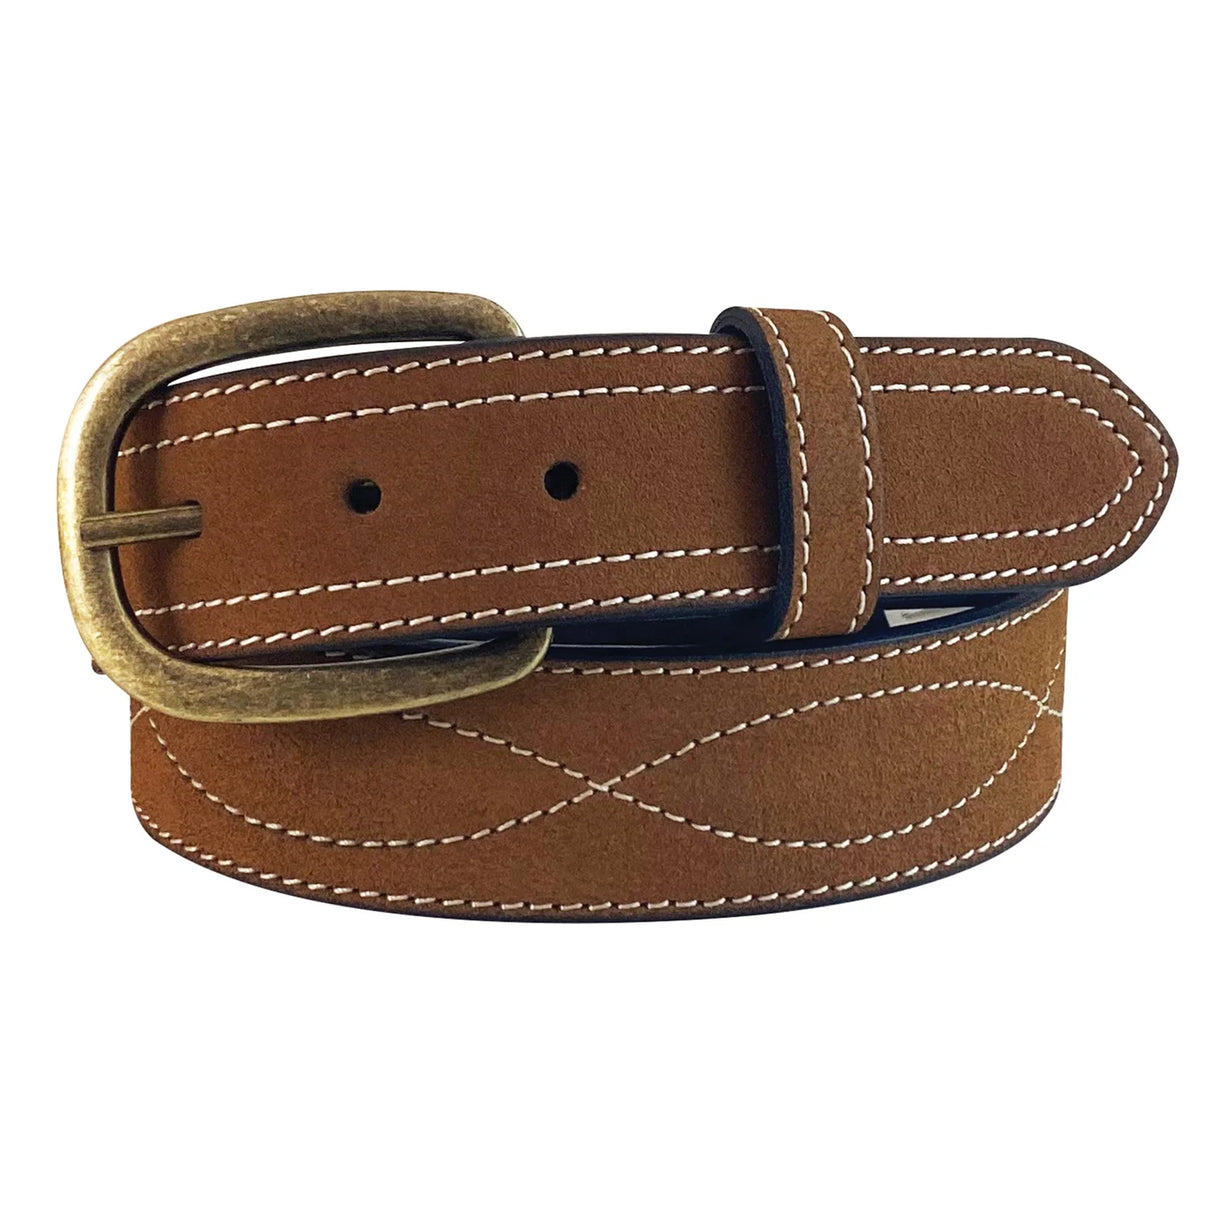 Roper Womens Stitched Suede Leather Belt 38mm 1 1/2"